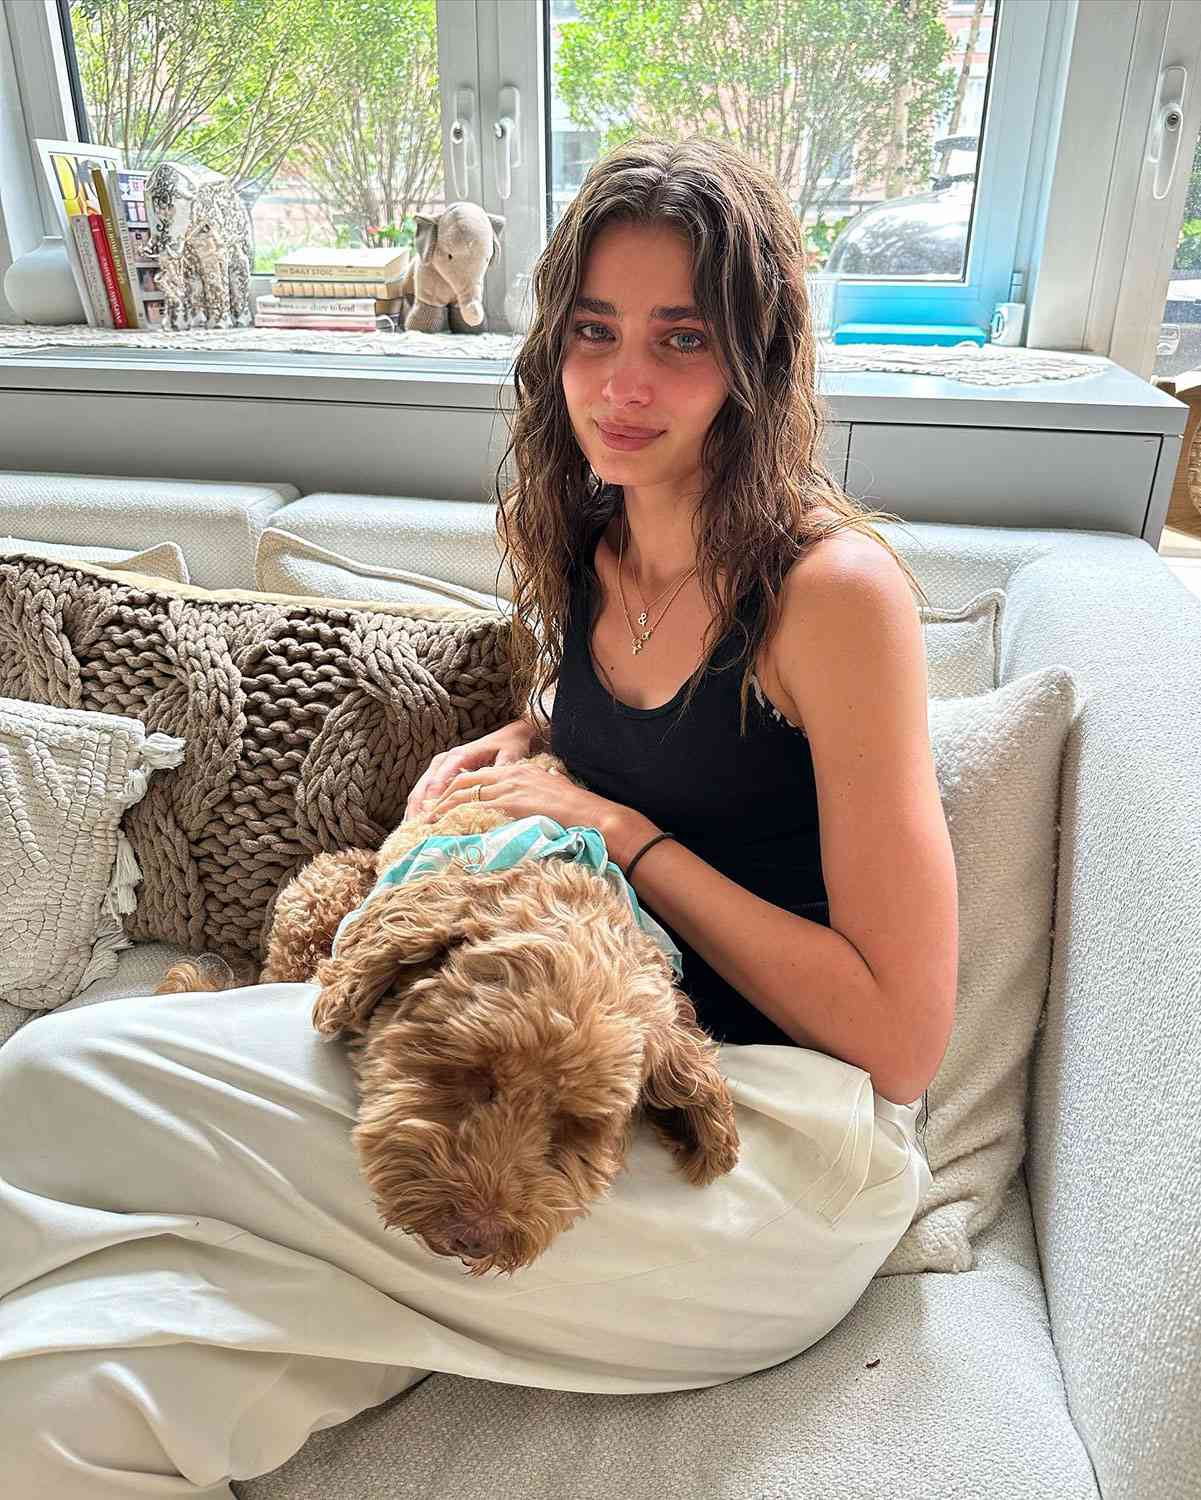 Taylor Hill Announces Death of 9-Year-Old Dog Tate: 'I Hope We Get to Meet Again Soon' https://www.instagram.com/p/CuUiI8jOhDs/